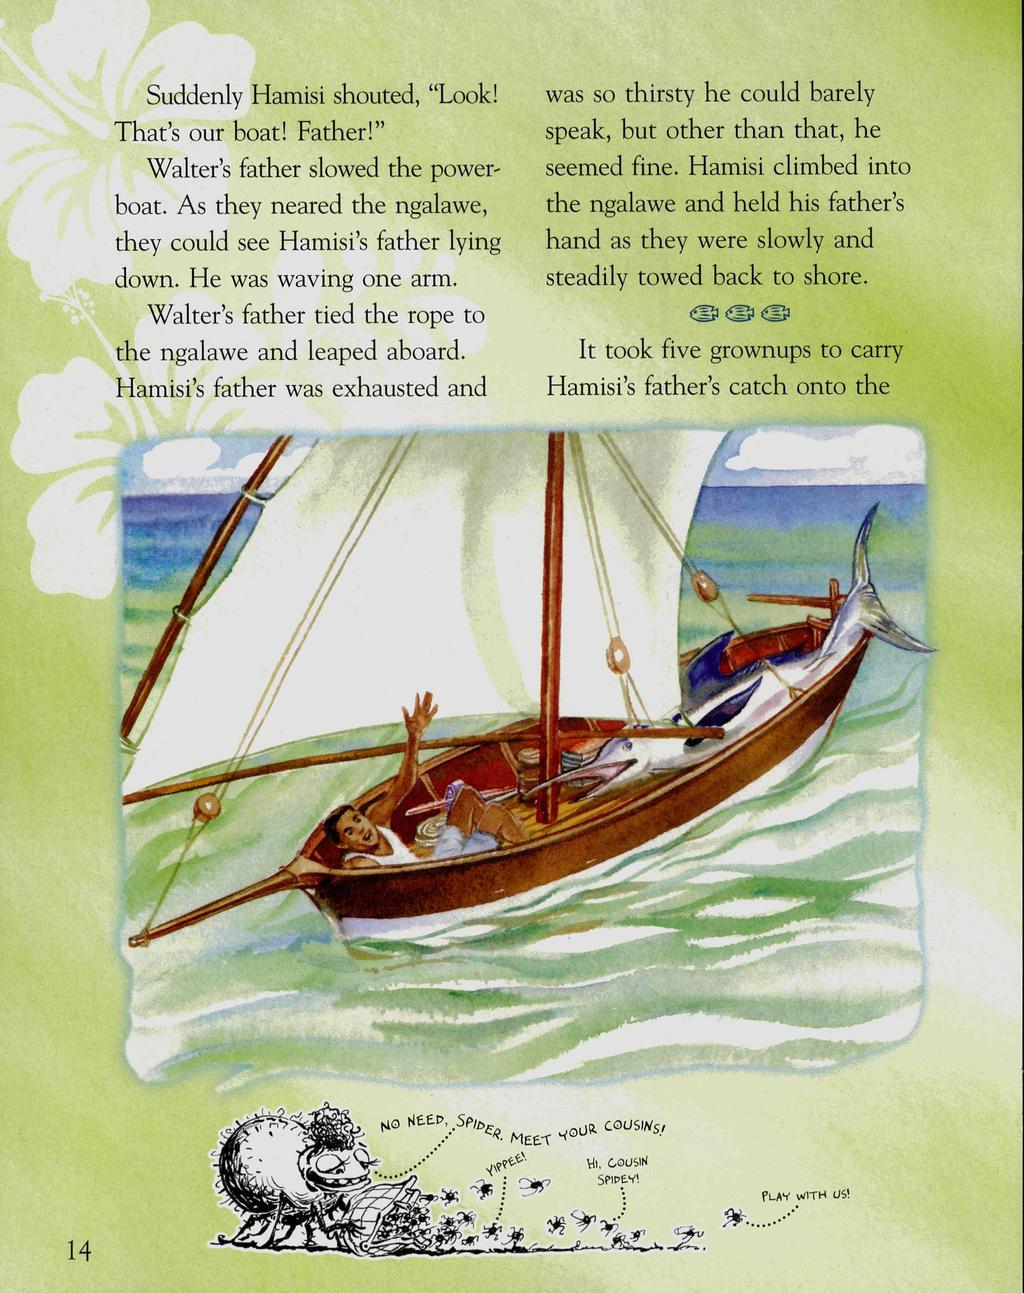 Suddenly Hamisi shouted, "Look! That's our boat! Eather!" Walter's father slowed the powerboat. As they neared the ngalawe, they could see Hamisi's father lying down. He was waving one arm.